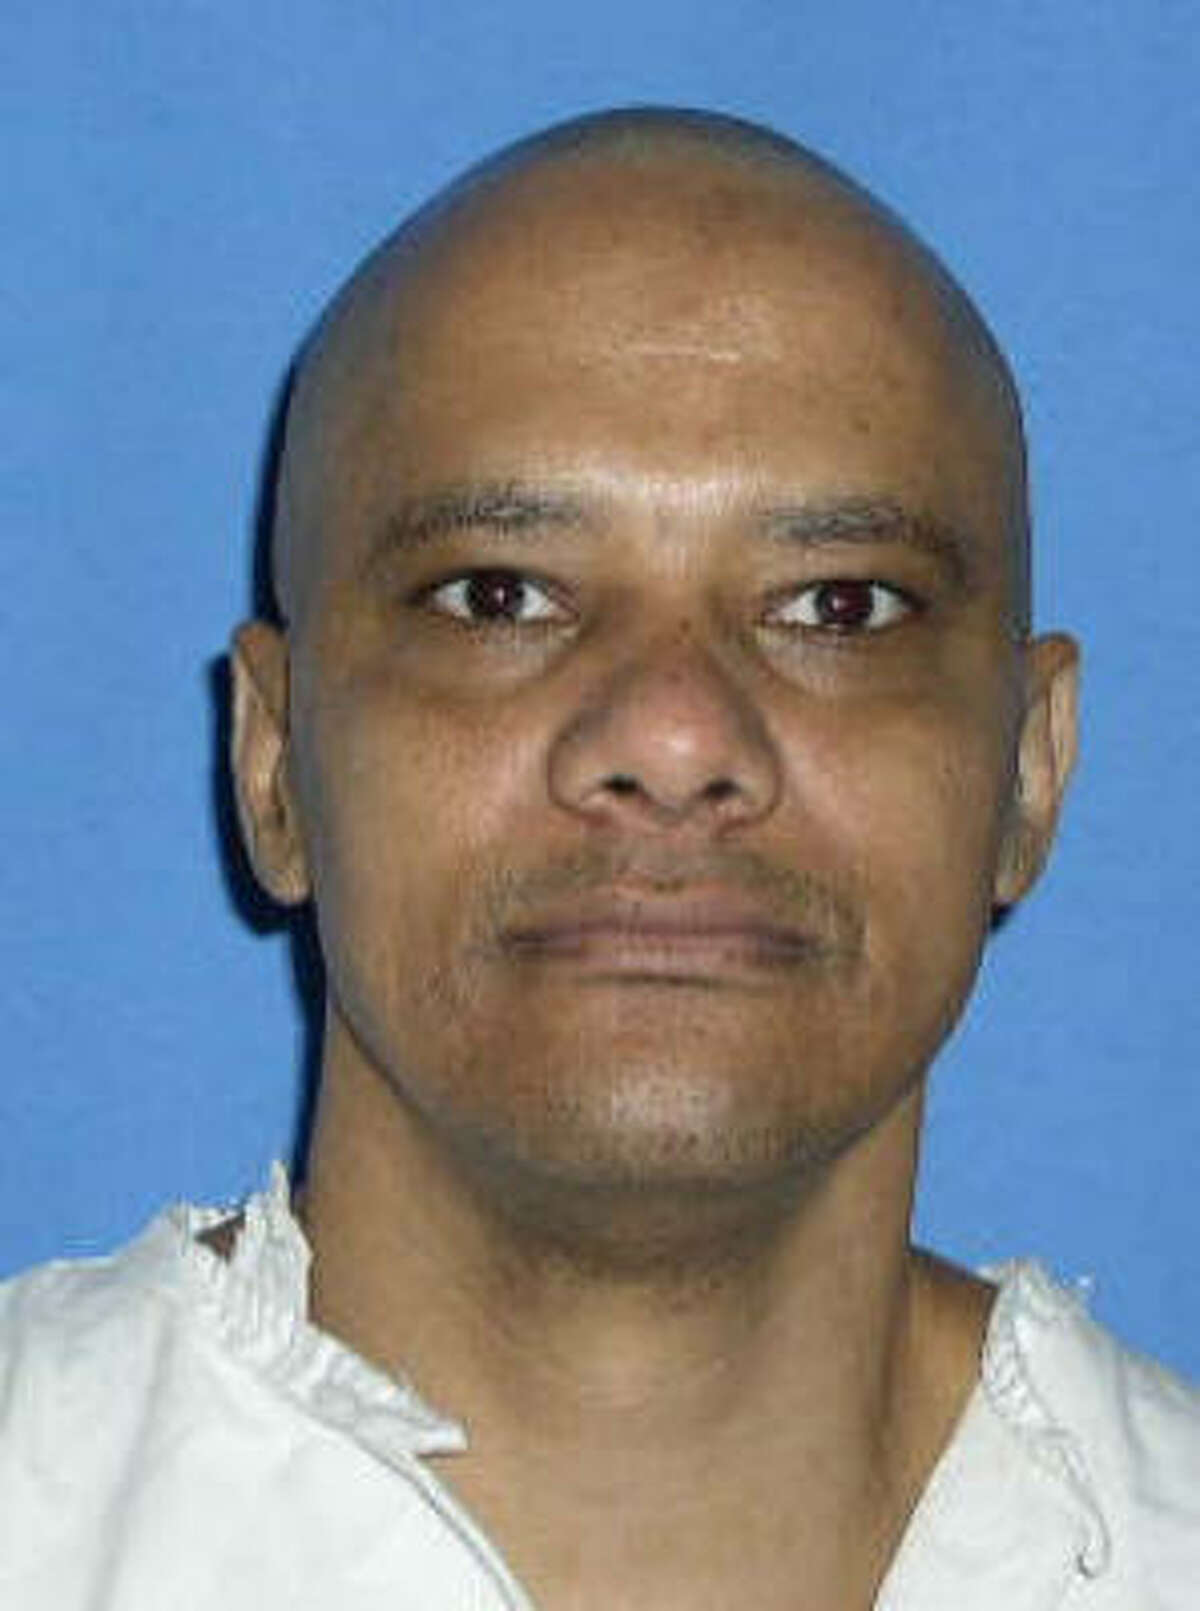 Inmate Michael Richard, 49, was executed Sept. 25 for the 1986 slaying of Marguerite Lucille Dixon, a 53-year-old nurse and mother of seven. The presiding judge of the Texas Court of Criminal Appeals would not allow Richard's 11th-hour appeal to be filed after 5 p.m. on the day he died.